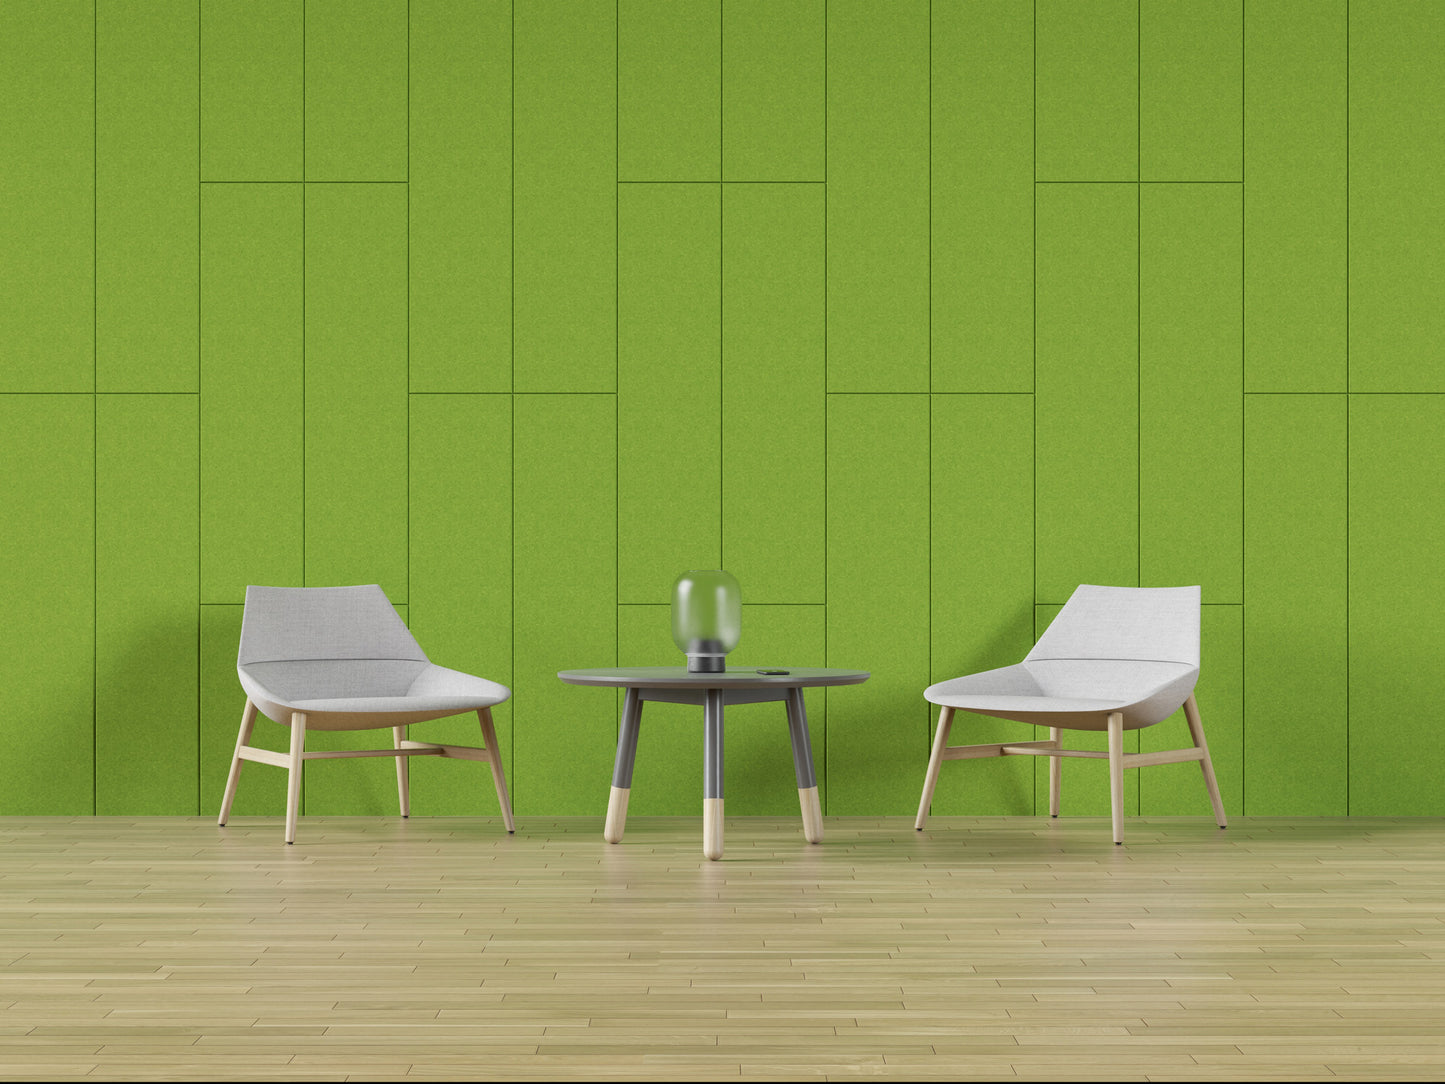 Acoustic felt wall coverings 4'x8' - beveled rectangles - room view render